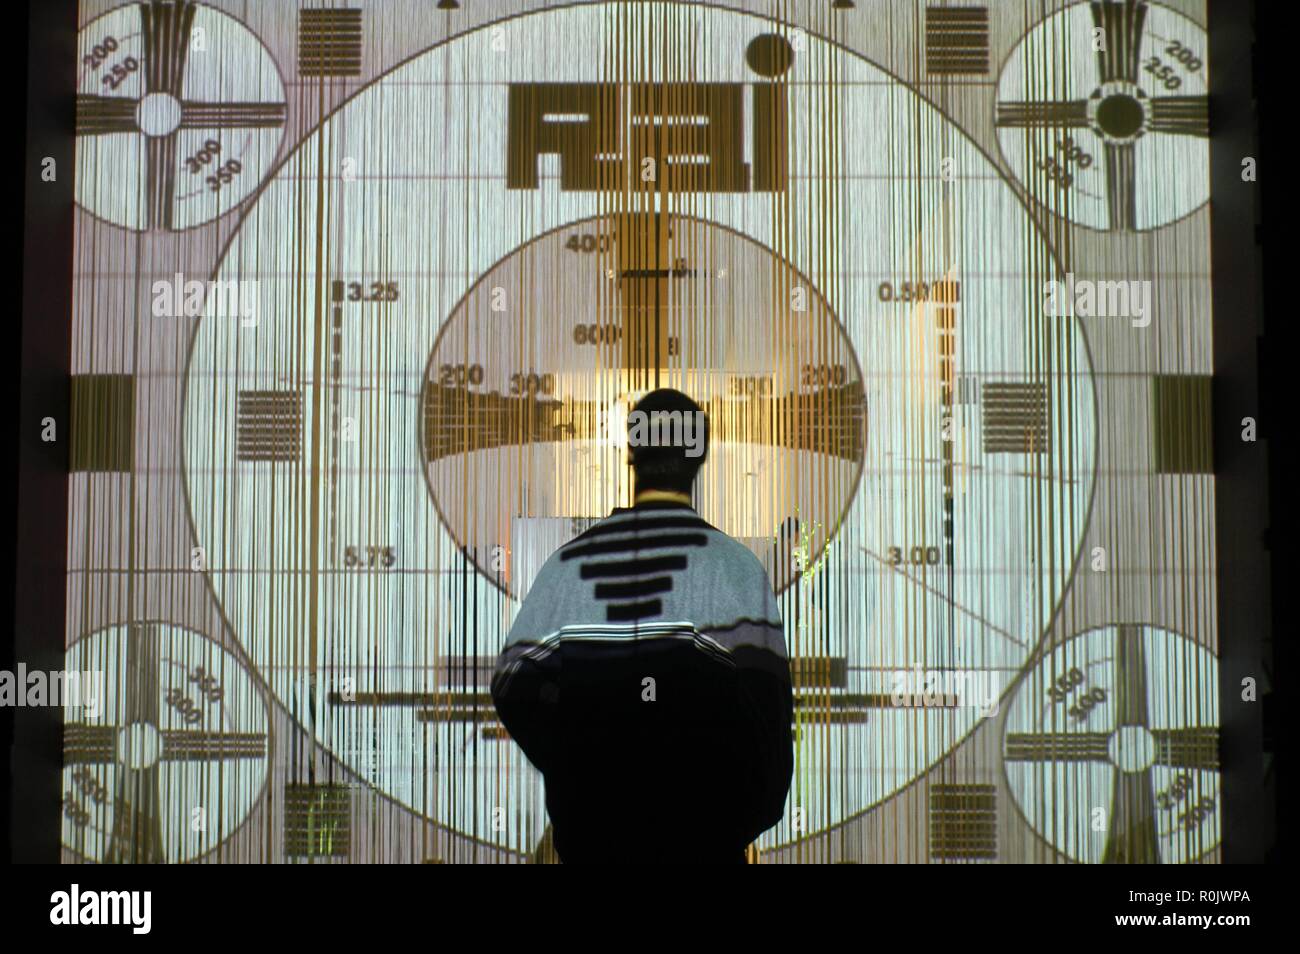 Milan, (Italy), Triennale contemporary art exhibition, artistic installation with RAI (Italian Radio and Television public company) old test pattern Stock Photo